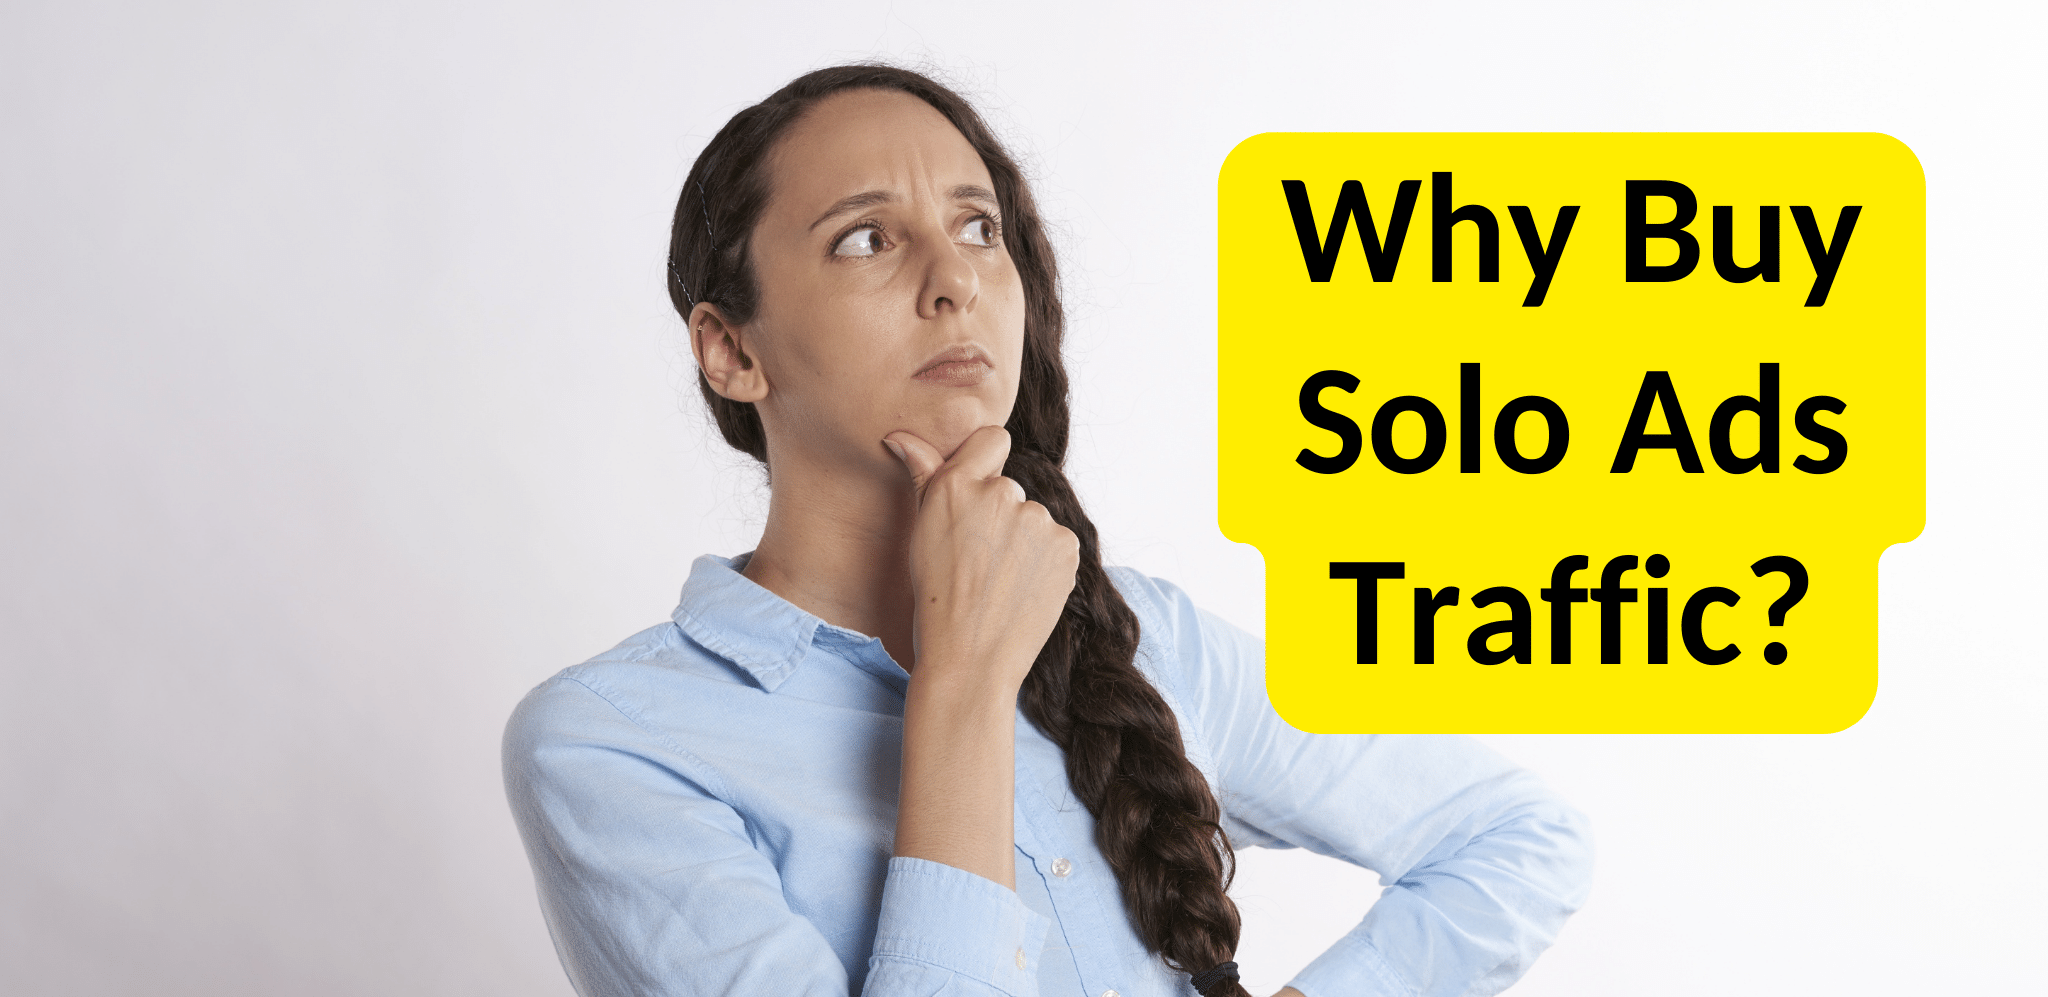 Why Buy Solo Ads Traffic